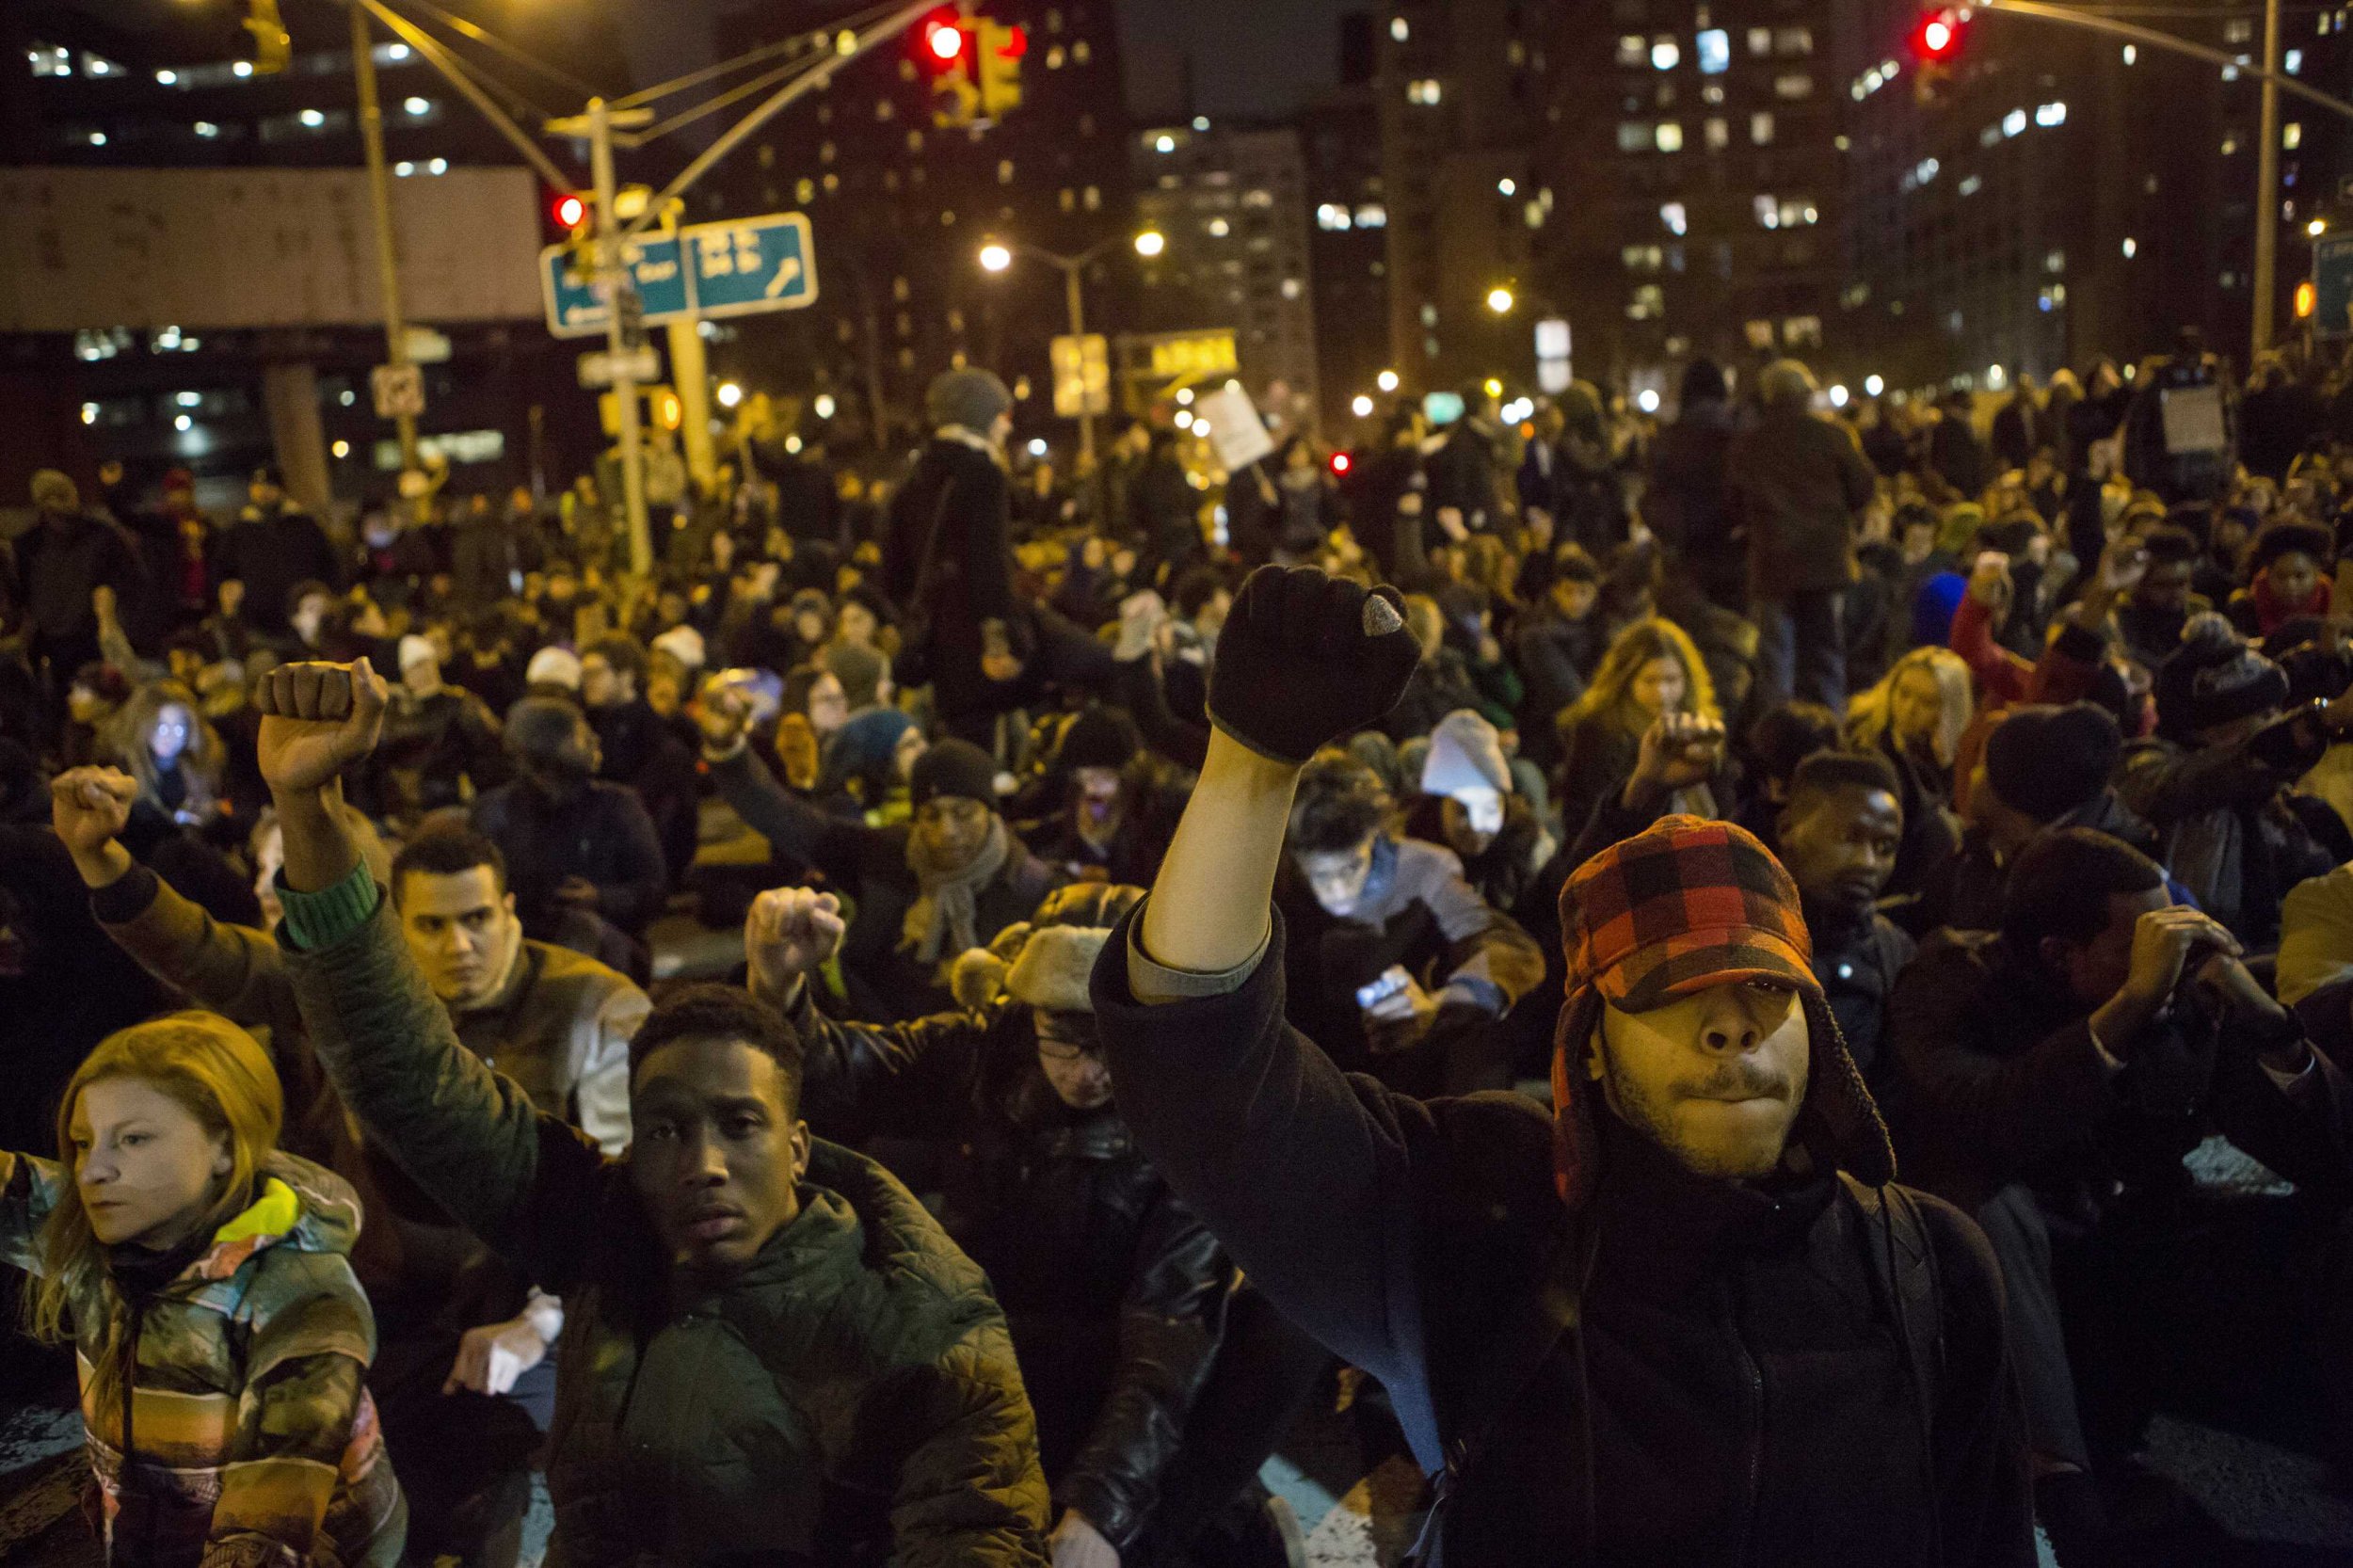 NYPD Arrest More than 200 Overnight in Ongoing Protests